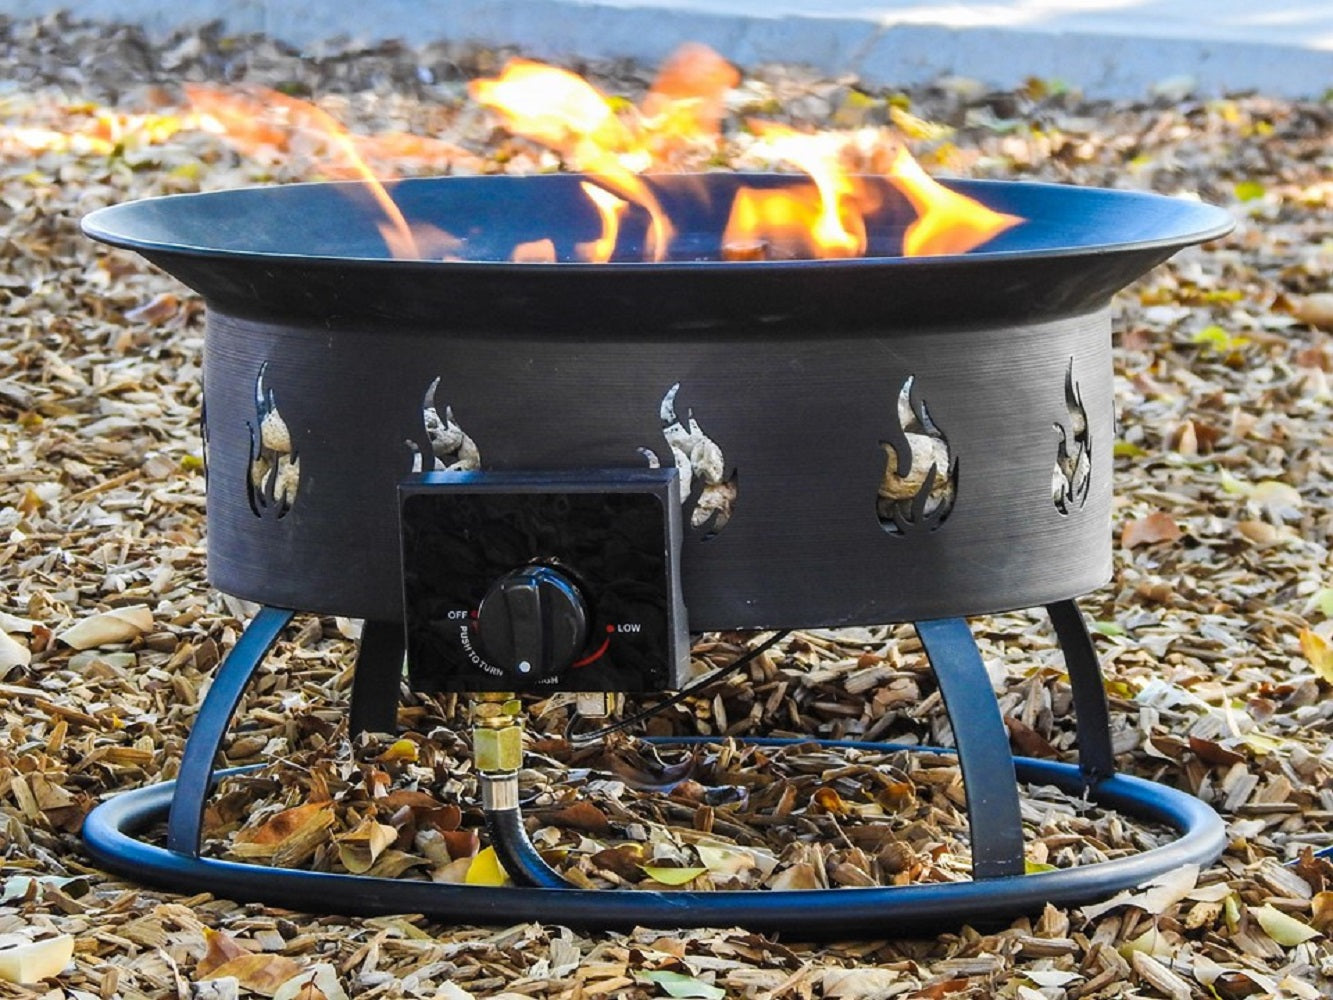 Hiland 19" Round Portable Camp Fire Pit in Black